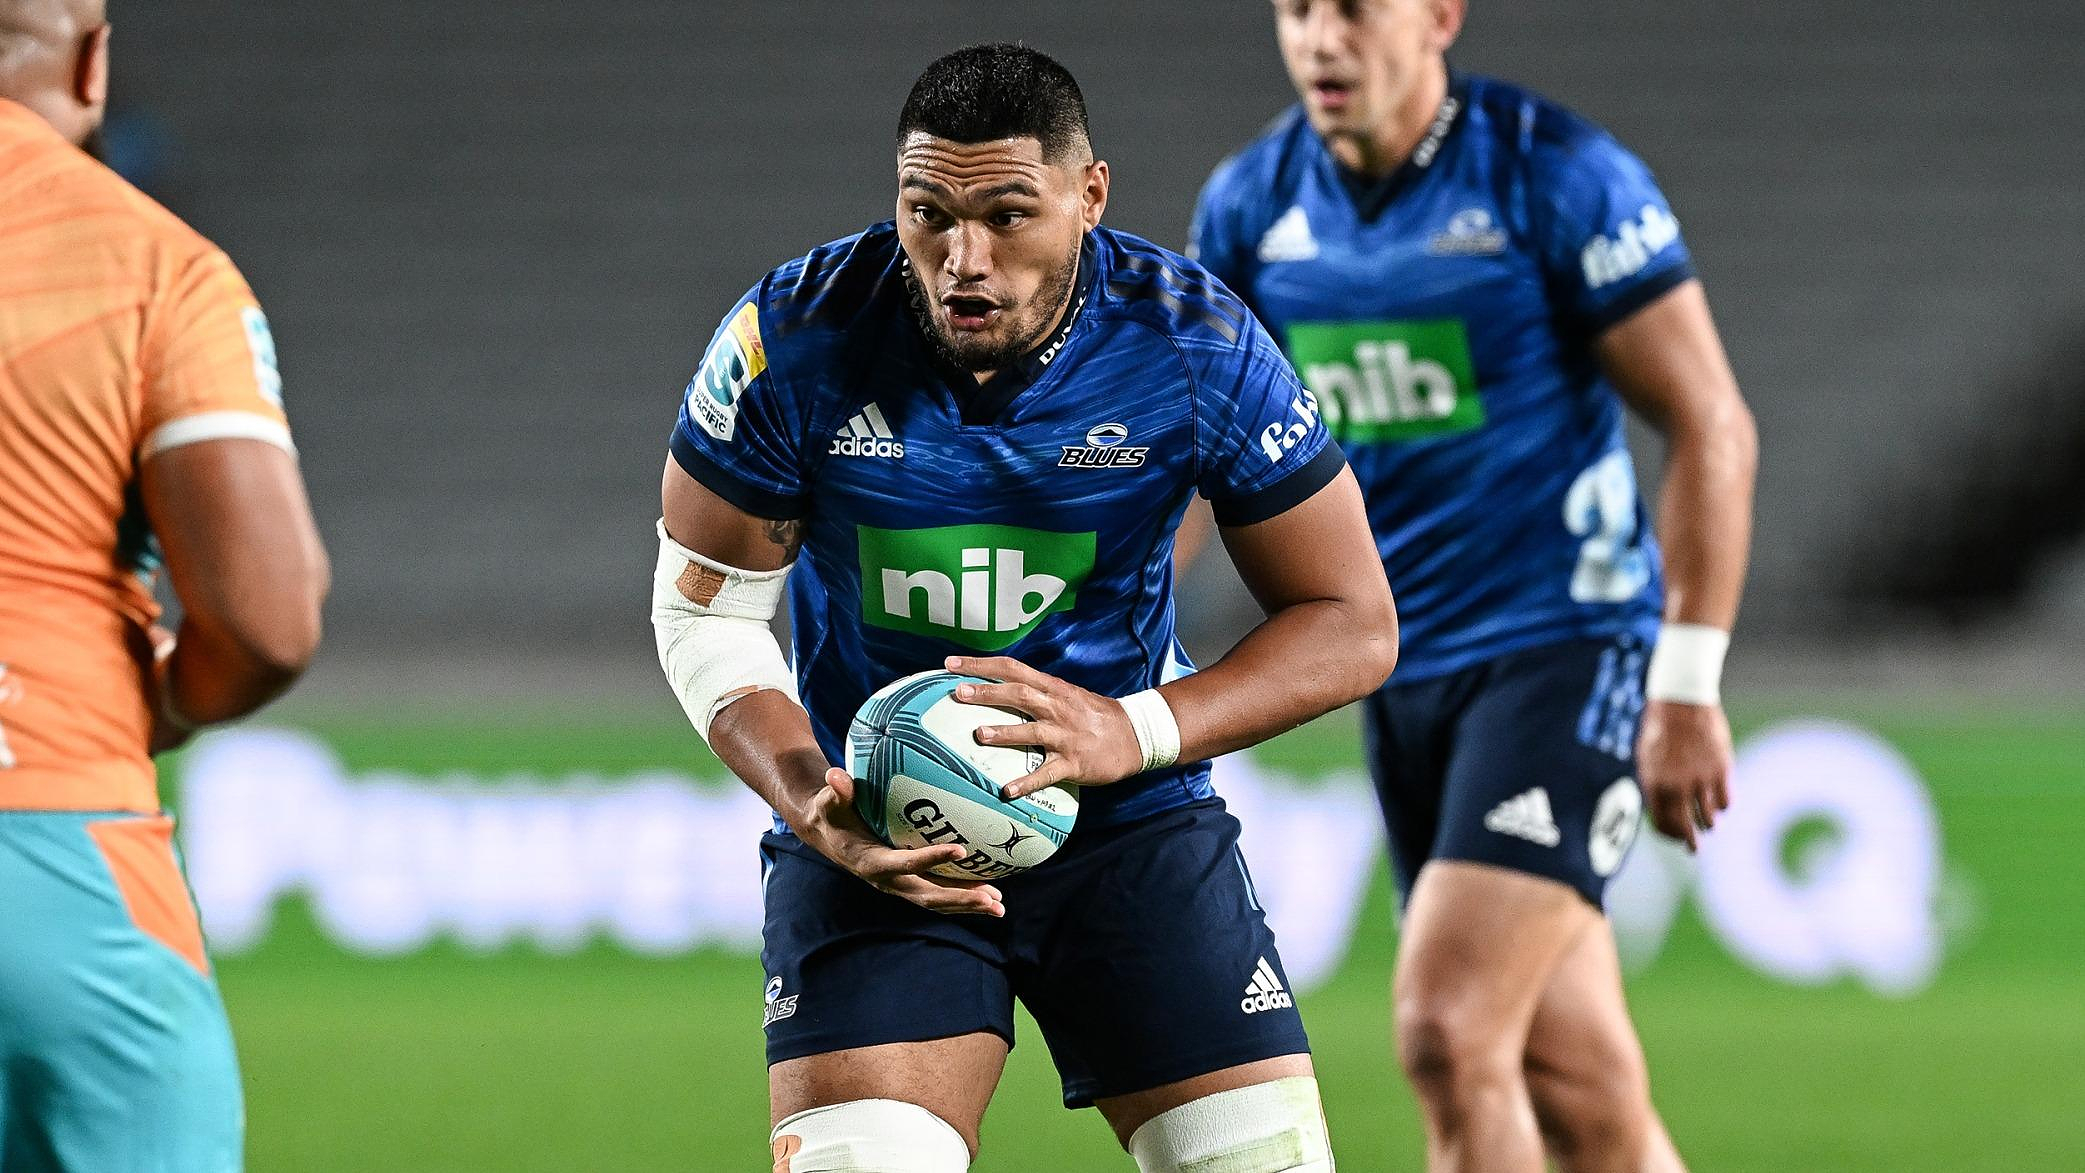 Rugby: Cameron Suafoa, second row of the Auckland Blues, puts his career on pause to treat cancer